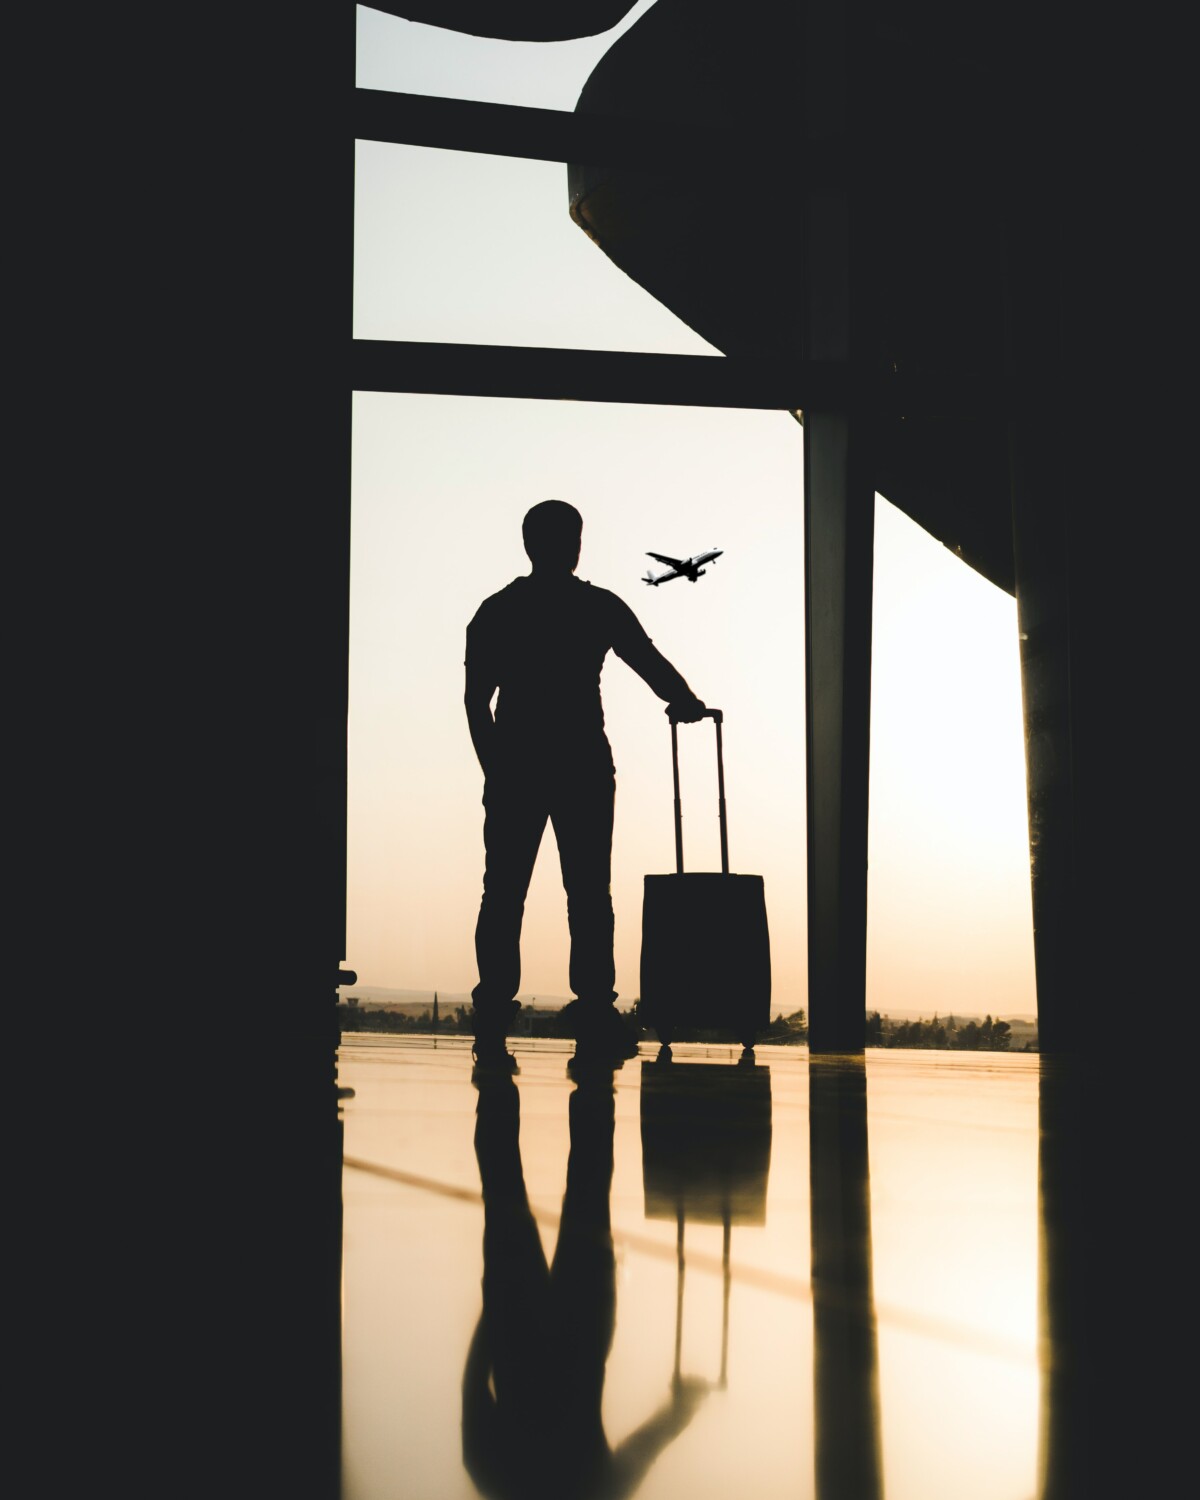 Silhouette of man standing in an airport with plane flying in background at sunset